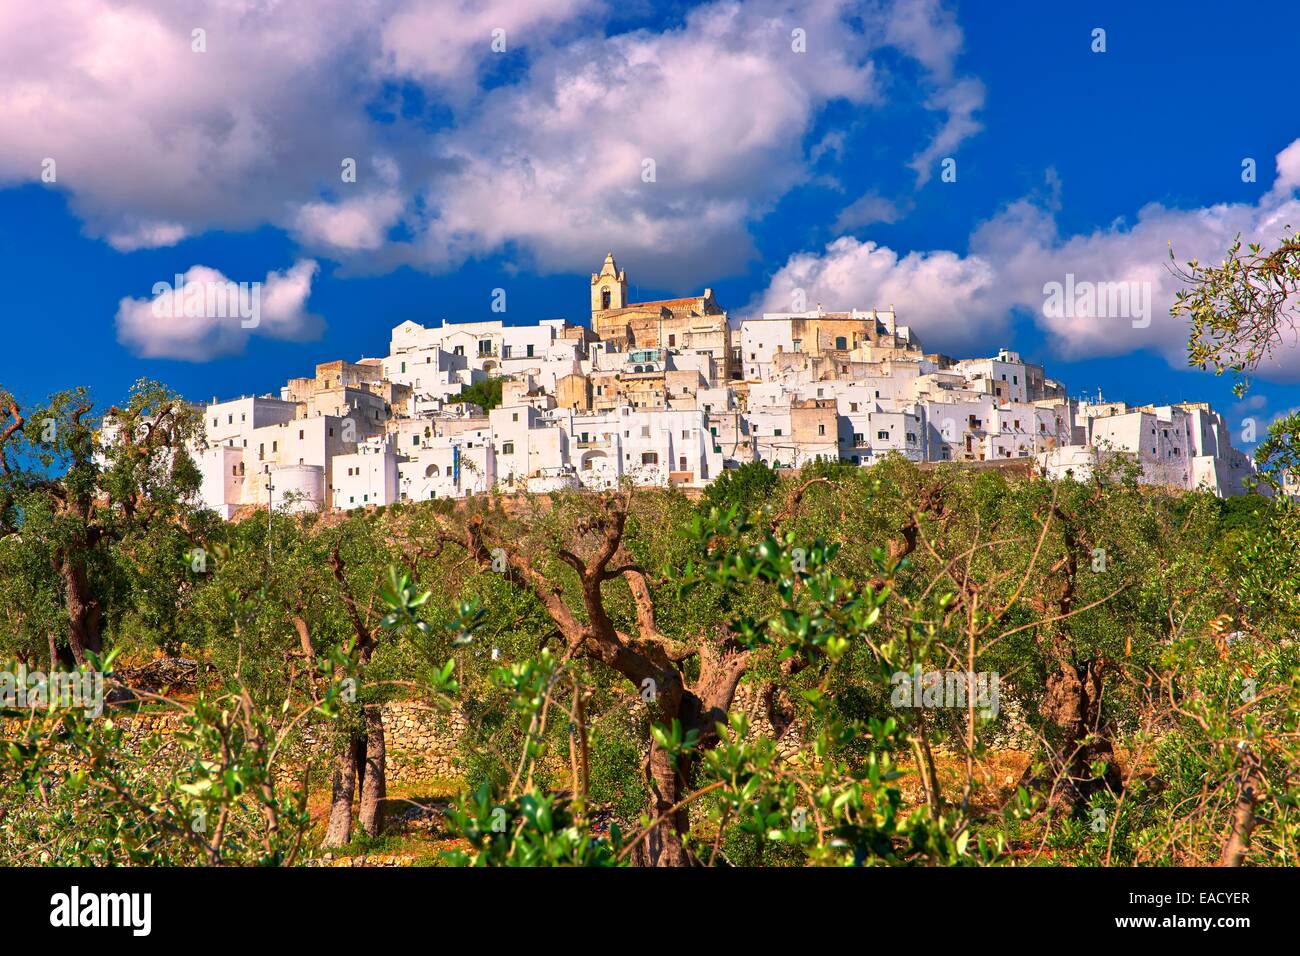 The medieval fortified hill town of Ostuni, also 'La Città Bianca', 'The White Town', Ostuni, Apulia, Italy Stock Photo